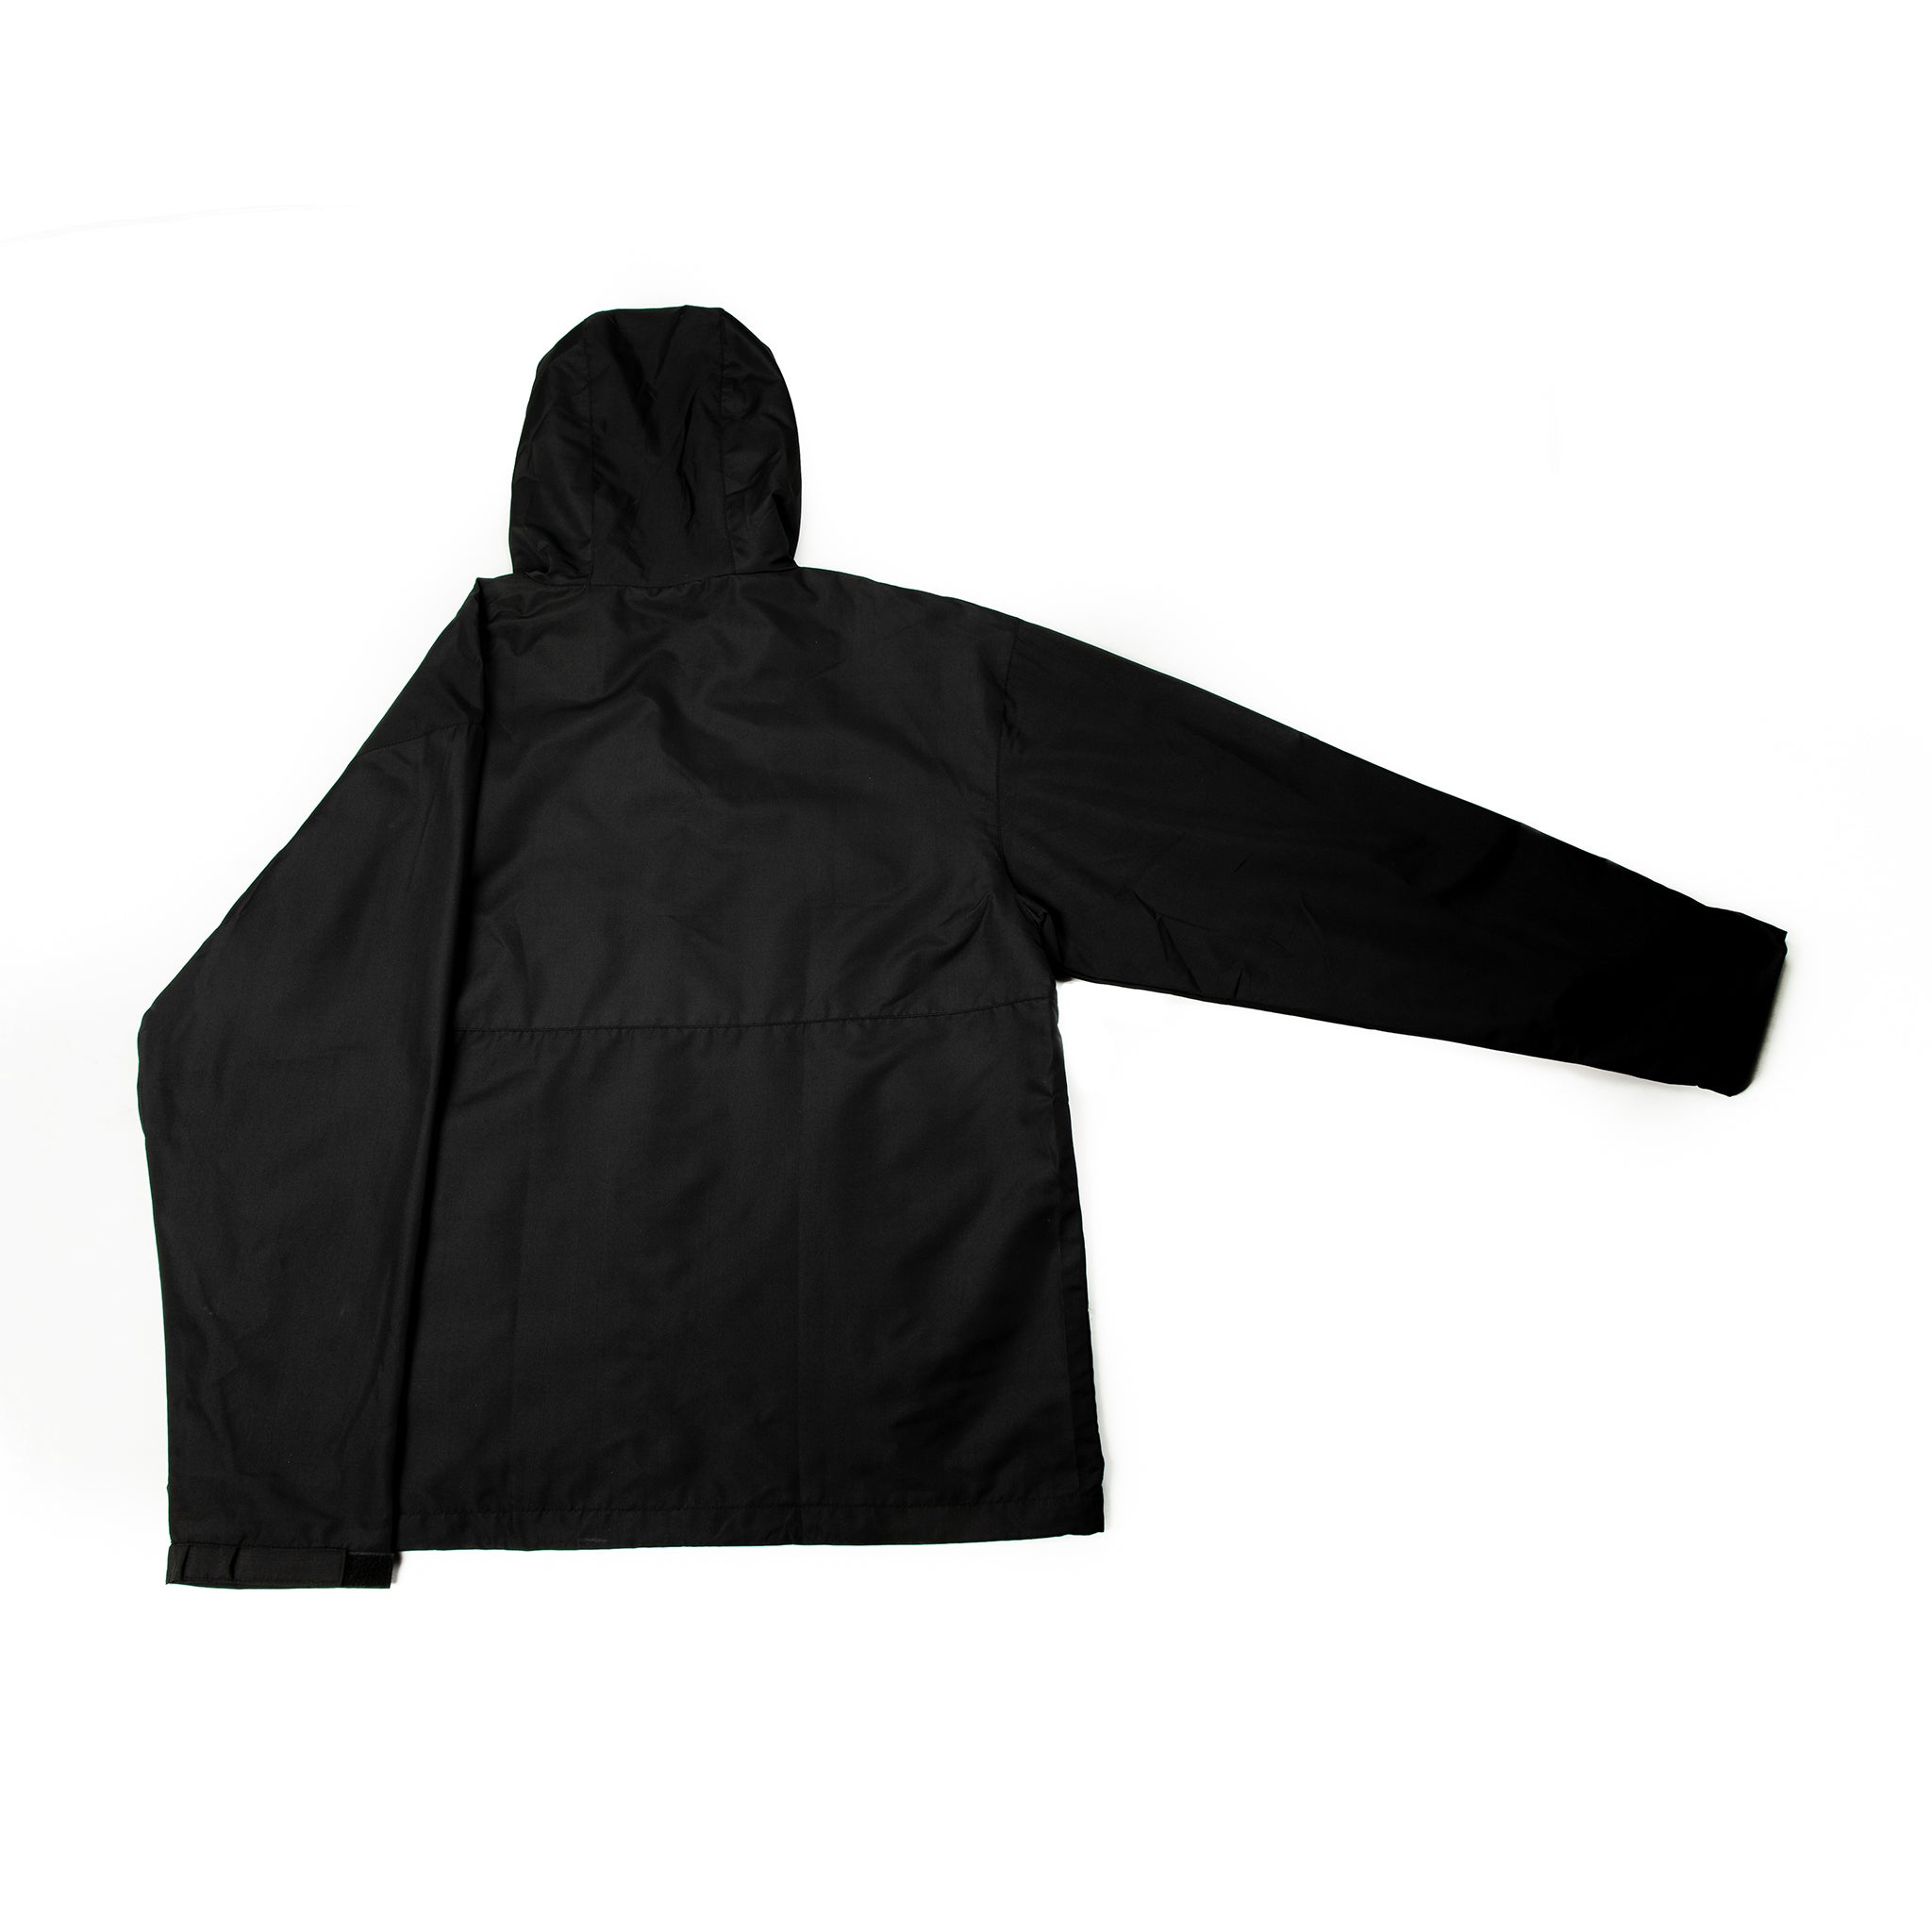 The Stacked Jacket Black